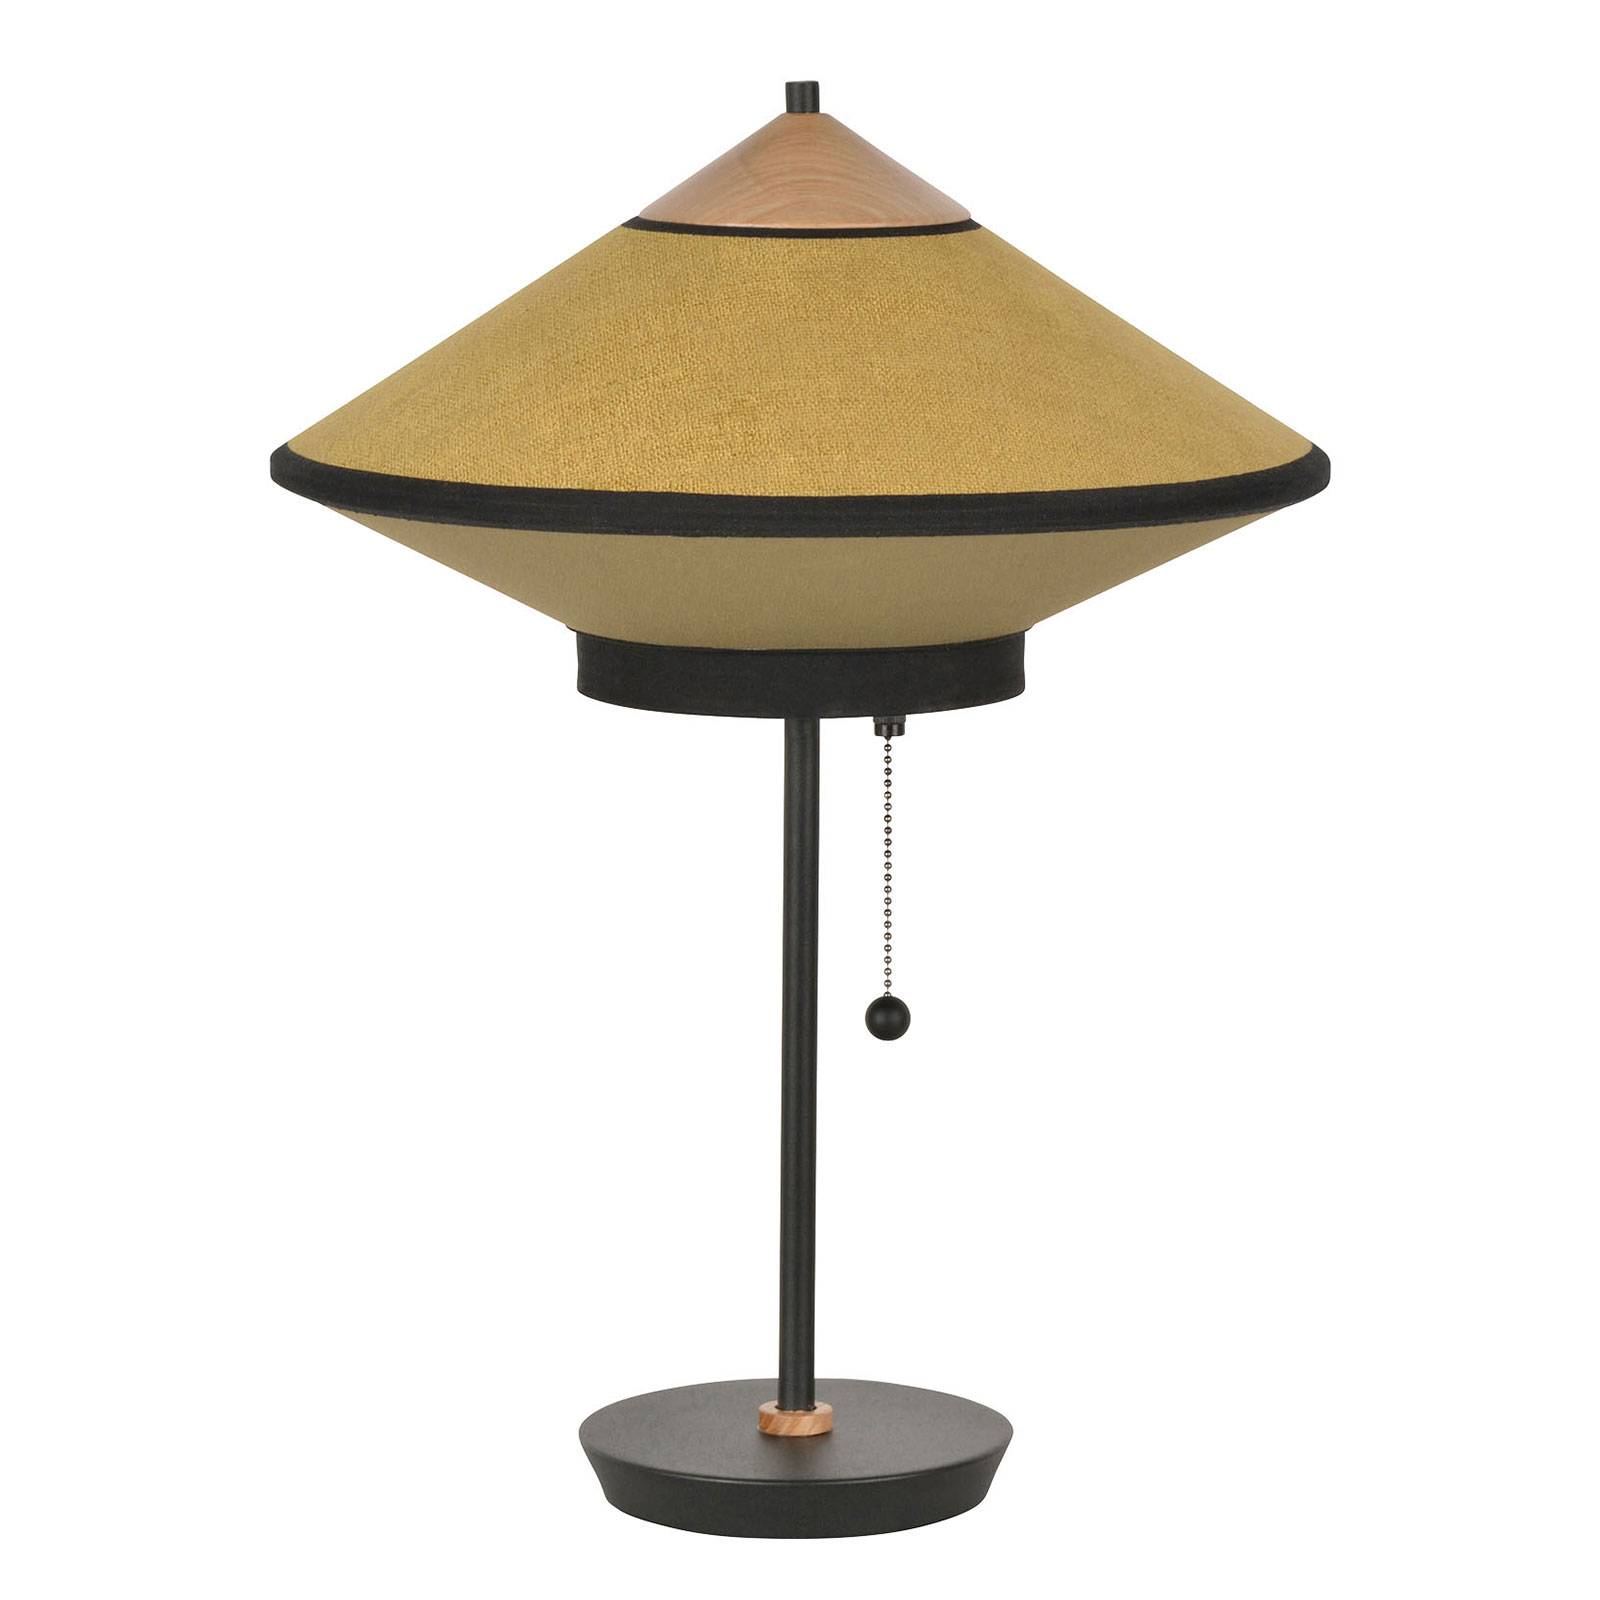 Forestier Cymbal S lampe à poser, bronze